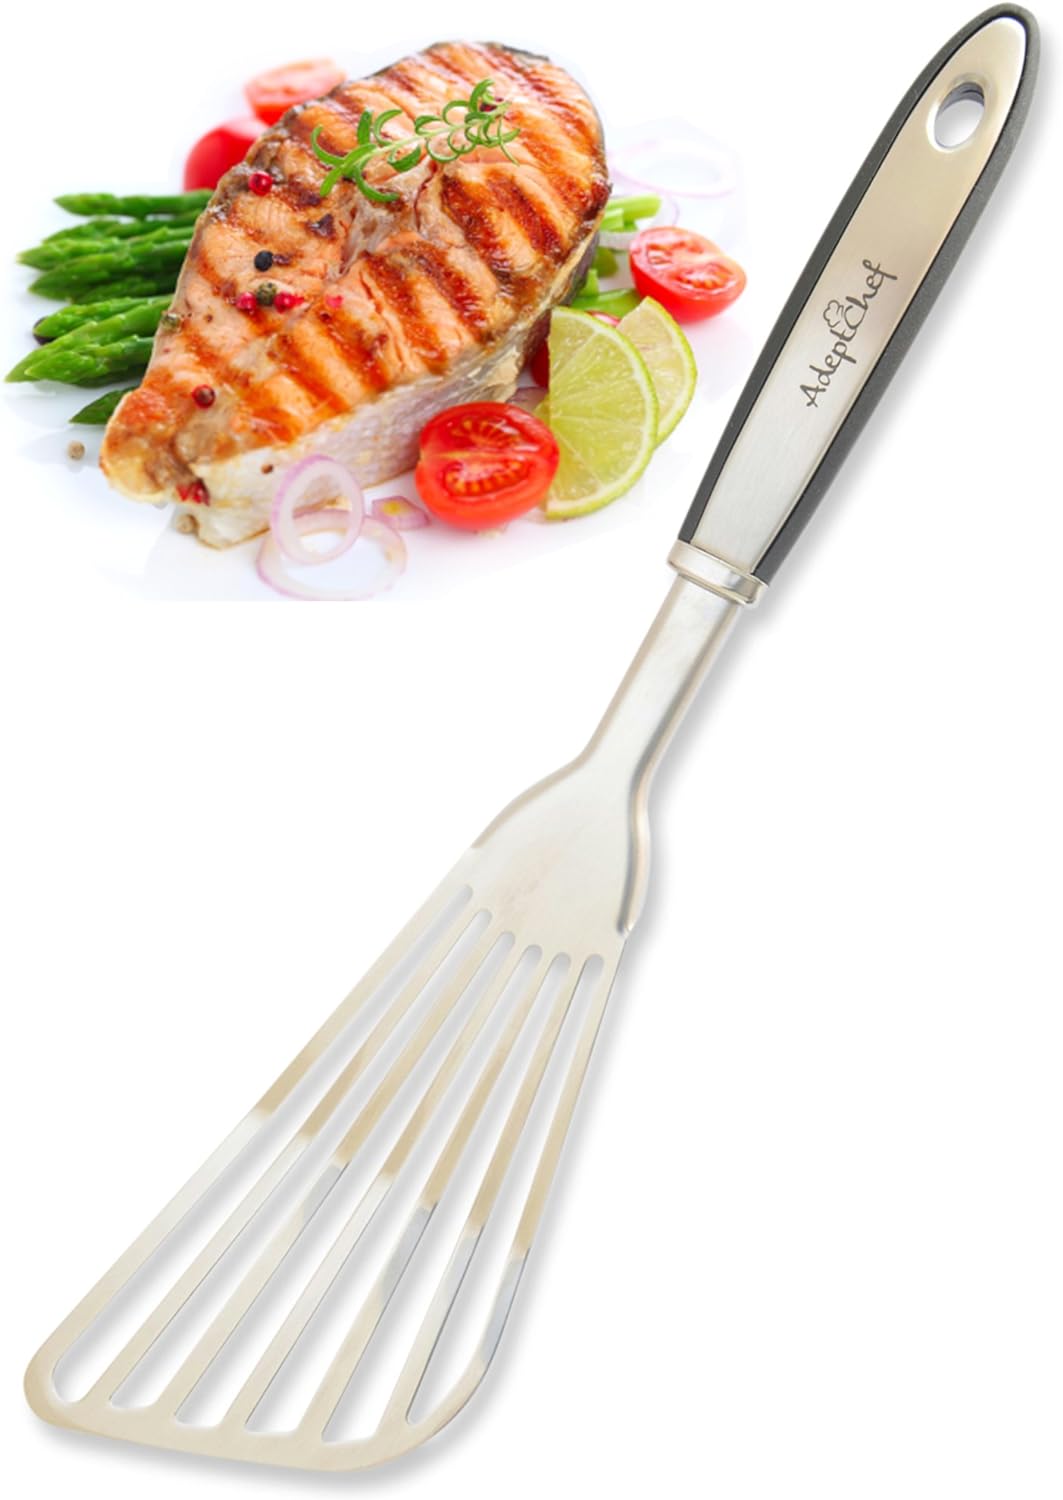 Fish Spatula  AdeptChef Stainless Steel, Slotted Turner  Thin-Edged Design Ideal For Turning & Flipping To Enhance Frying & Grilling  Sturdy Handle, Multi-Purpose  Buy Yours TODAY!